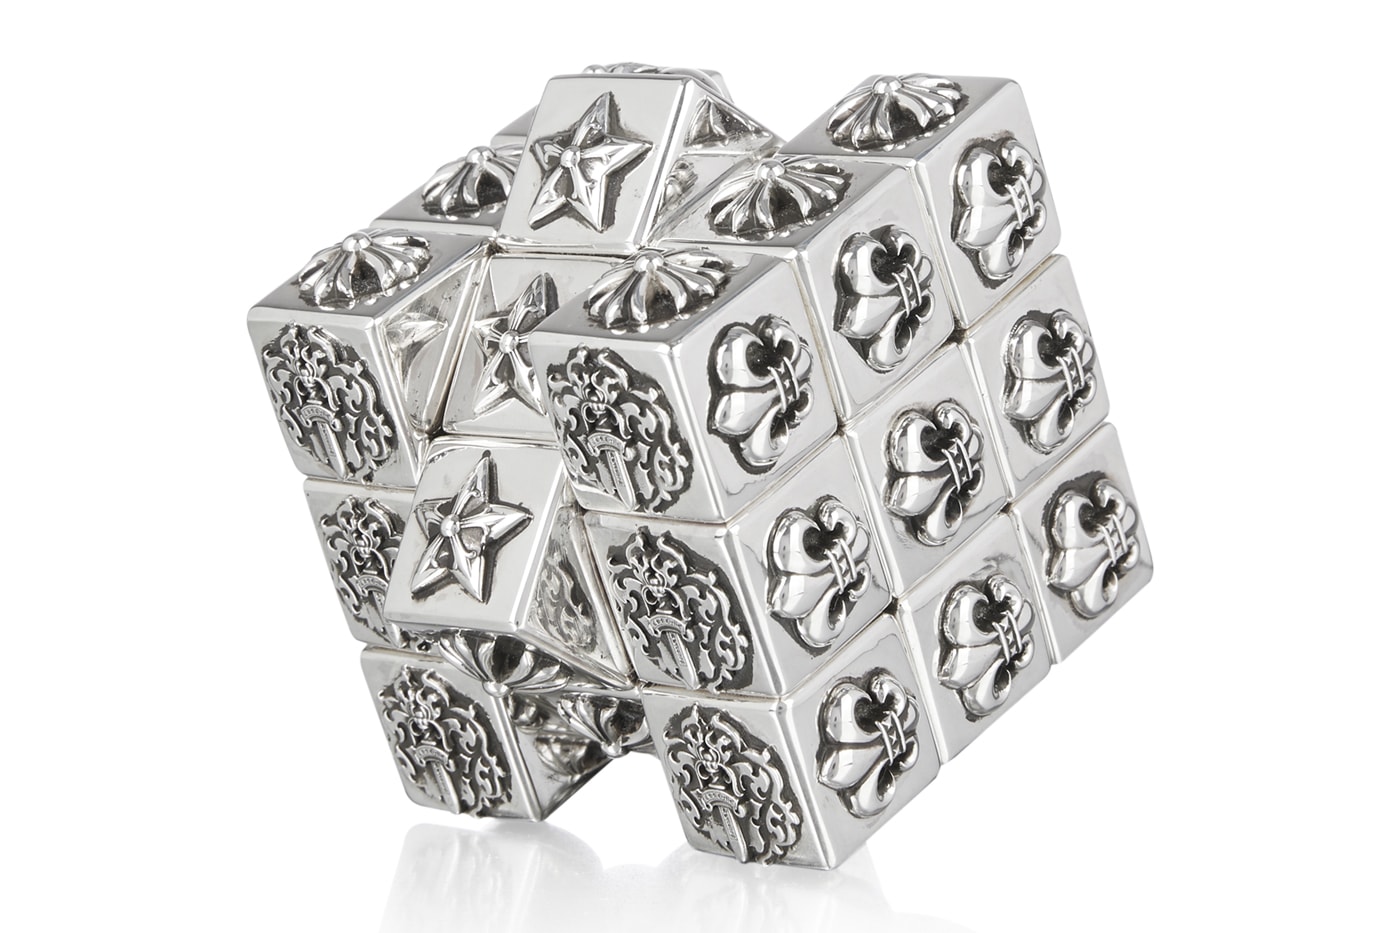 Chrome Hearts Puzzle Rubiks Cube Release Info Buy Price 